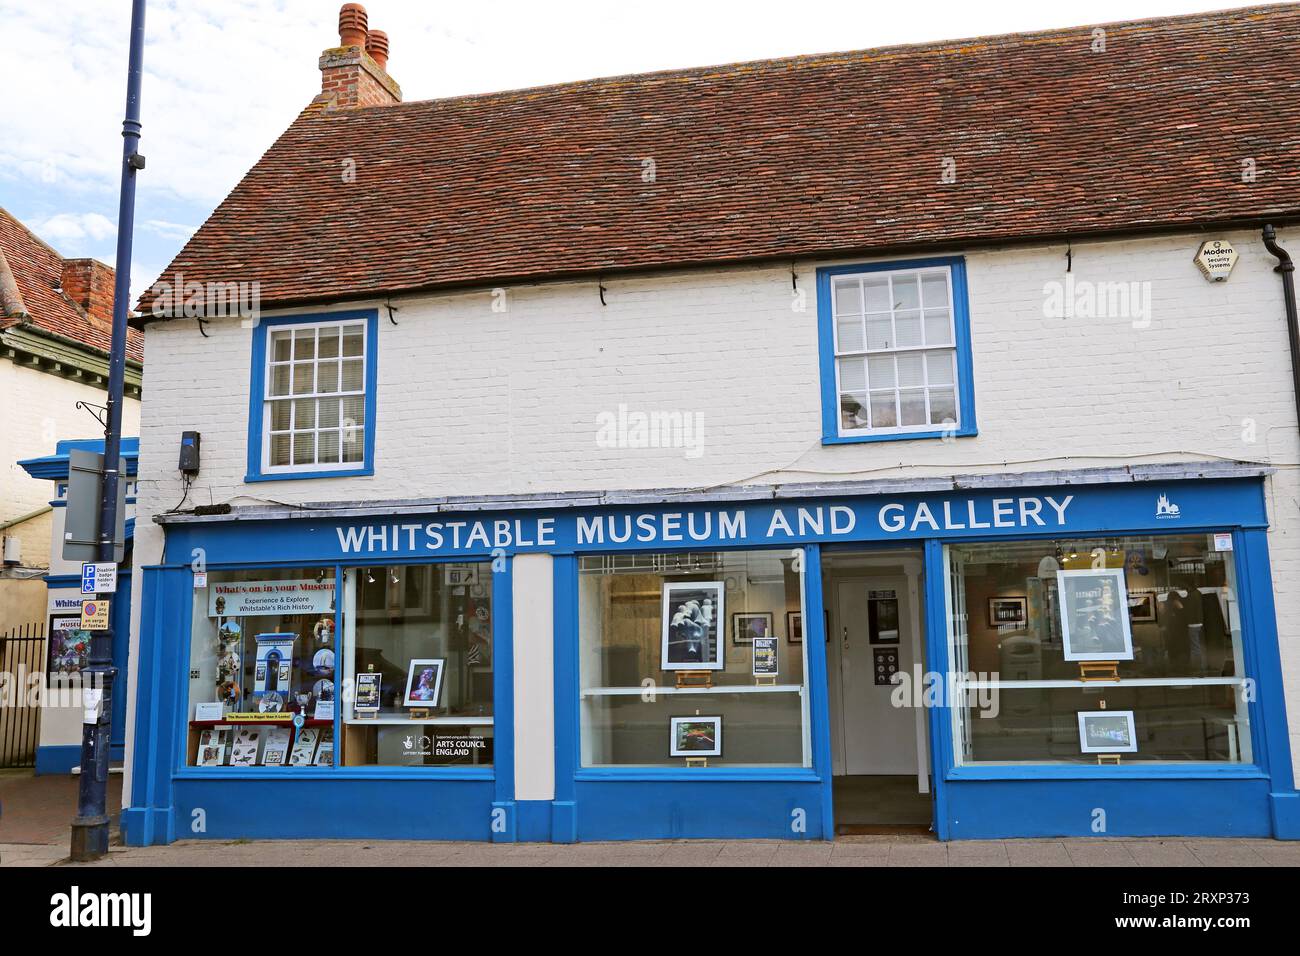 Whitstable Museum and Gallery, Oxford Street, Whitstable, Kent, England, Great Britain, United Kingdom, UK, Europe Stock Photo